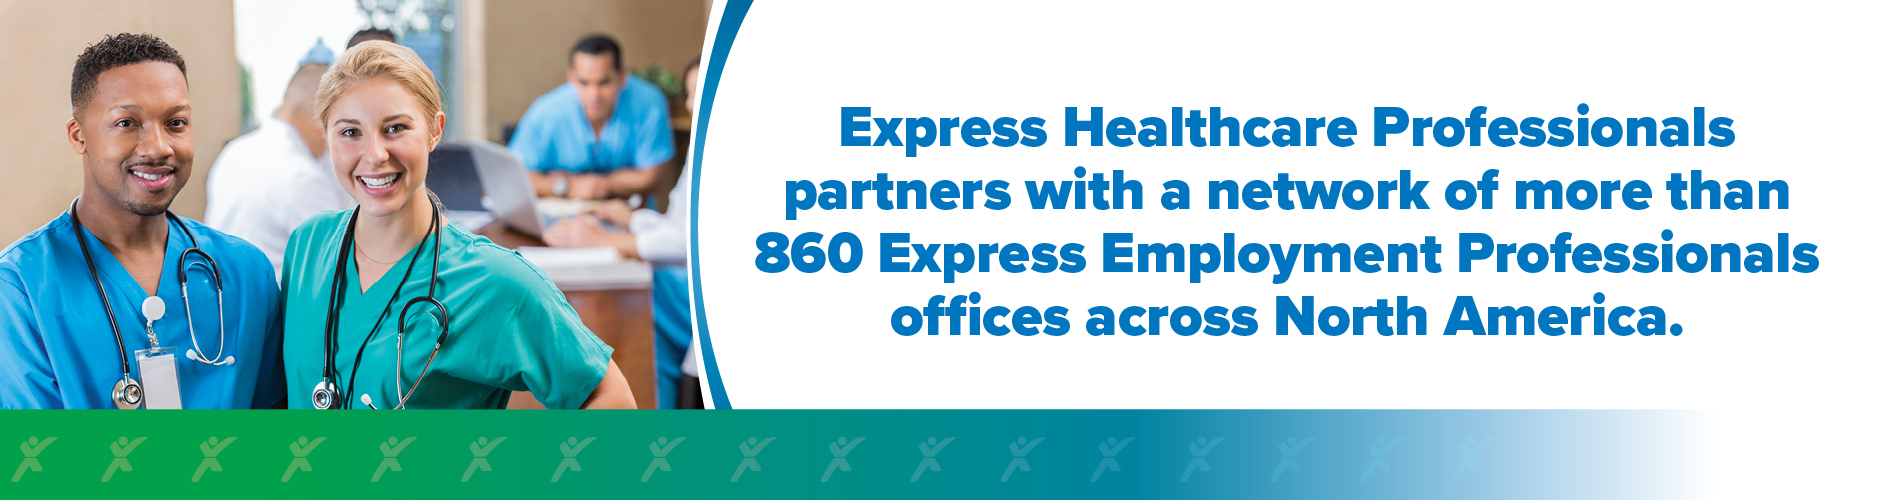 Express Healthcare Professionals partners with a networks of more than 860 Express Employment Professionals offices across North America